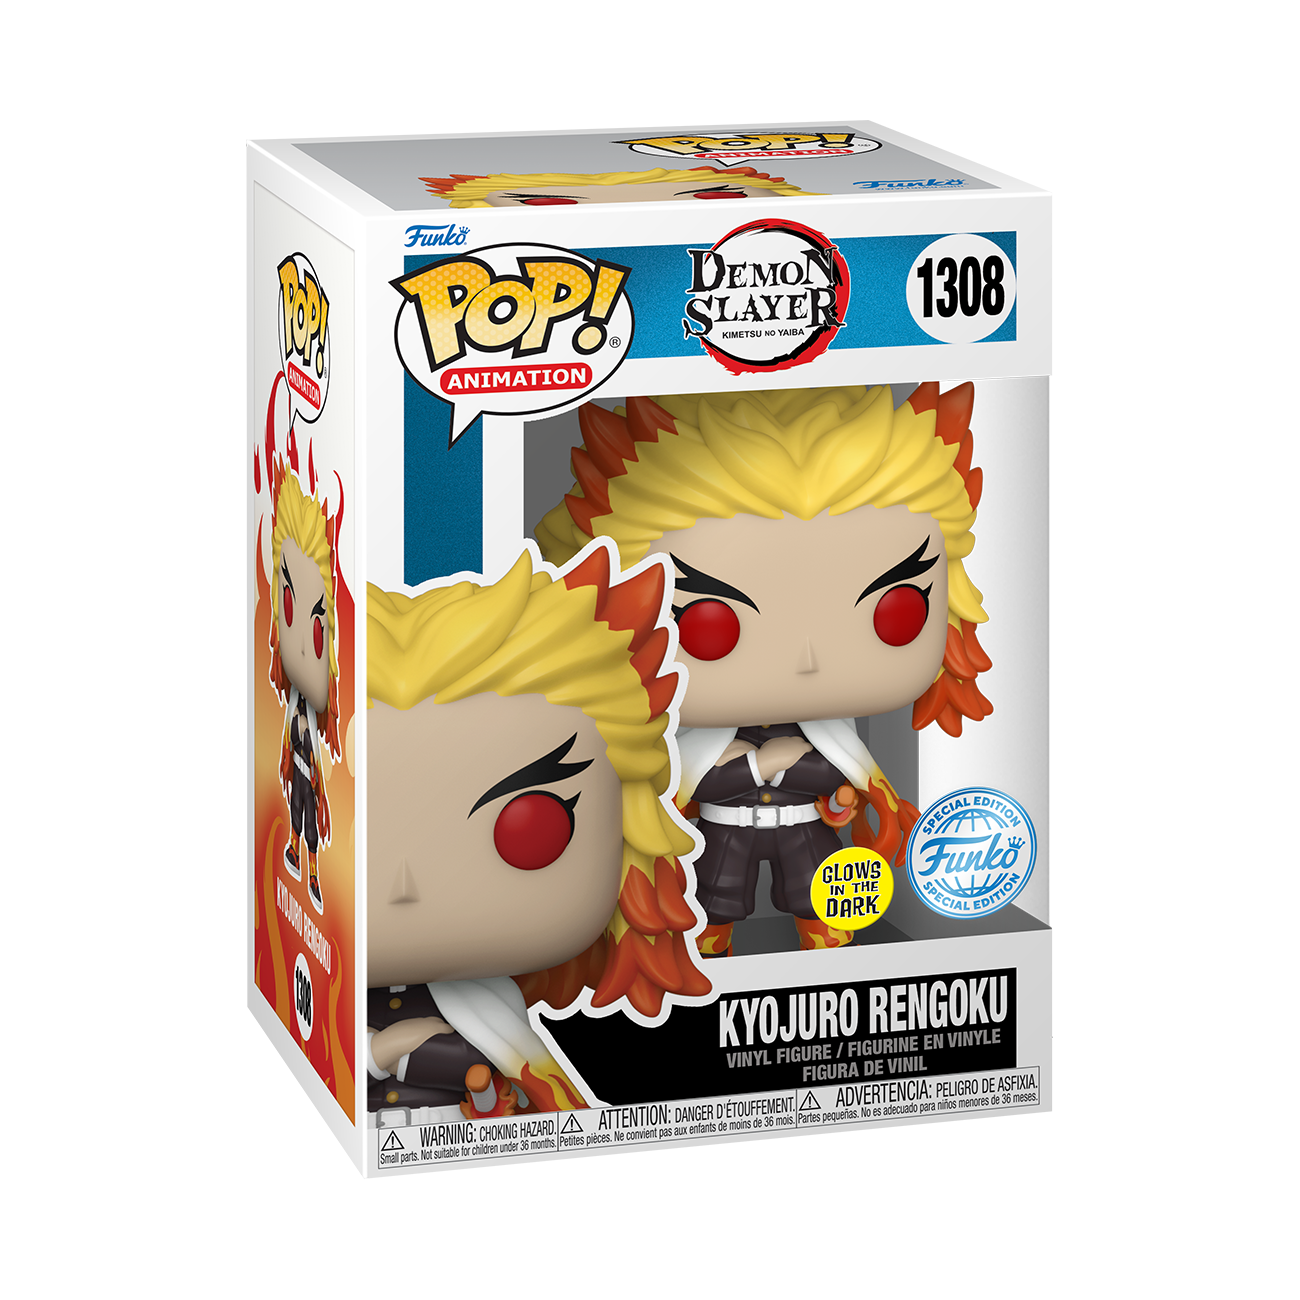 Kredsløb udbytte syndrom Funko Pop! Vinyl Official EU Store | Loungefly Bags & Web Exclusives